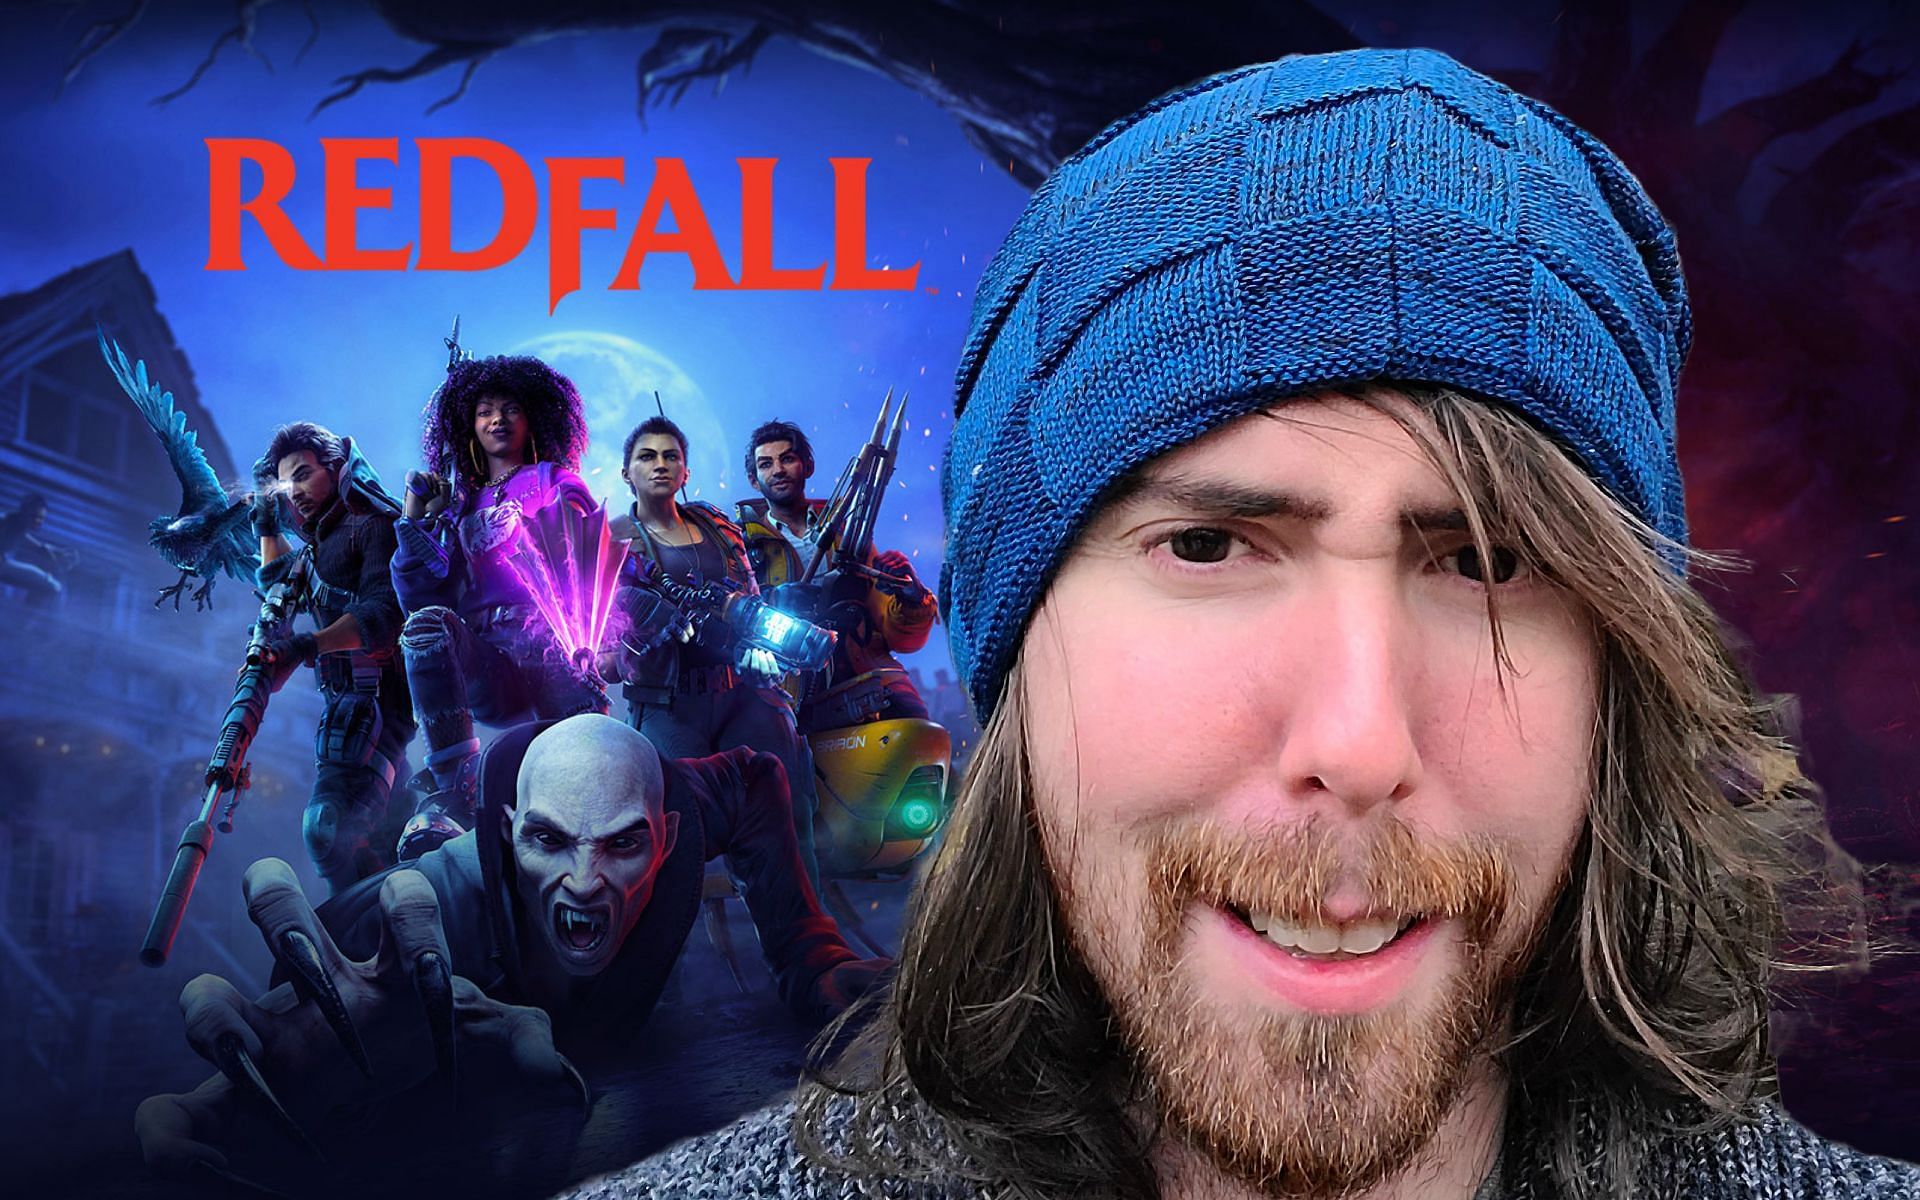 Asmongold talks about his interaction with Redfall